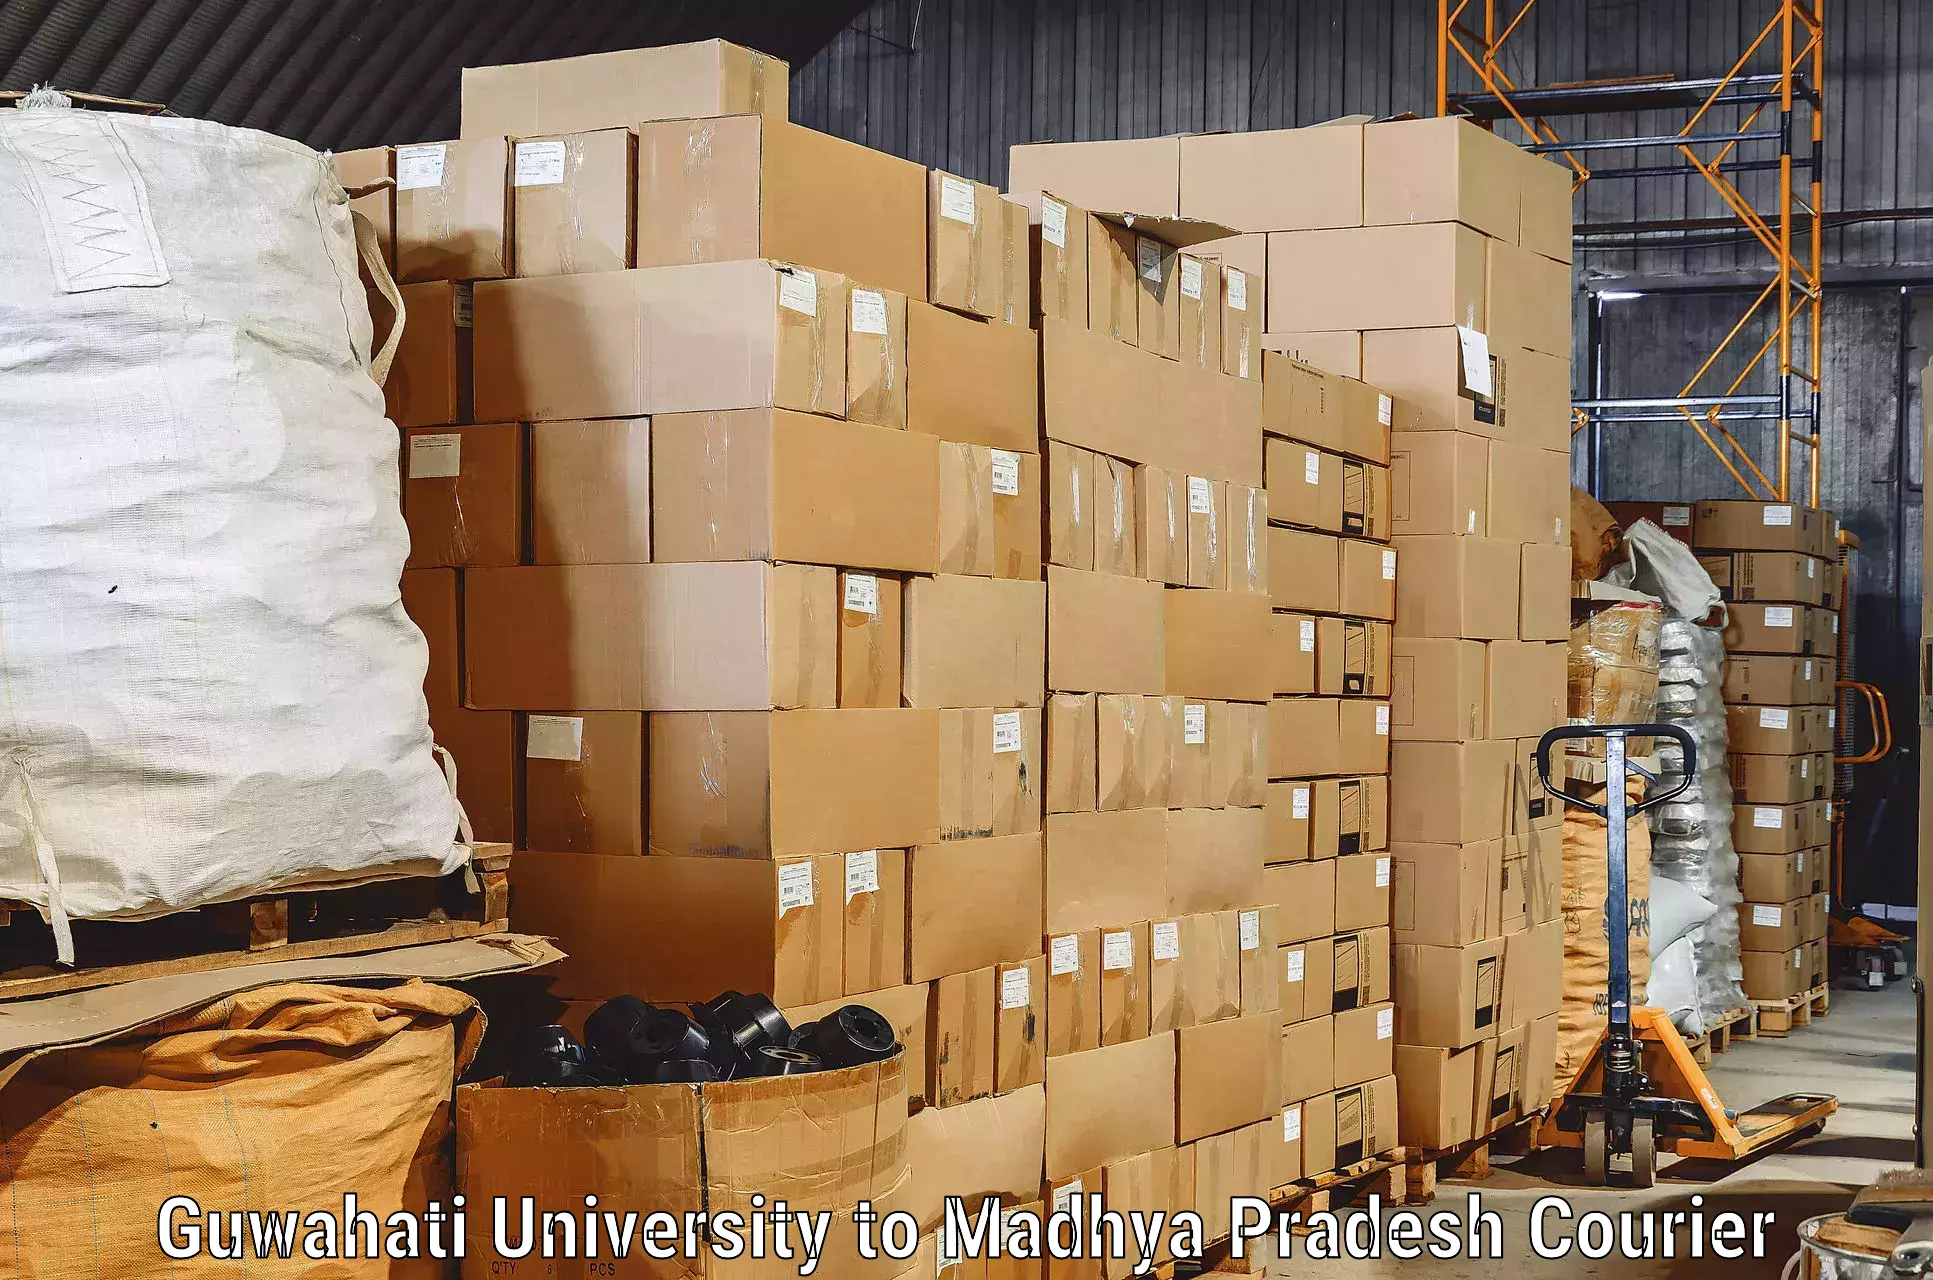 Reliable moving assistance in Guwahati University to Satna